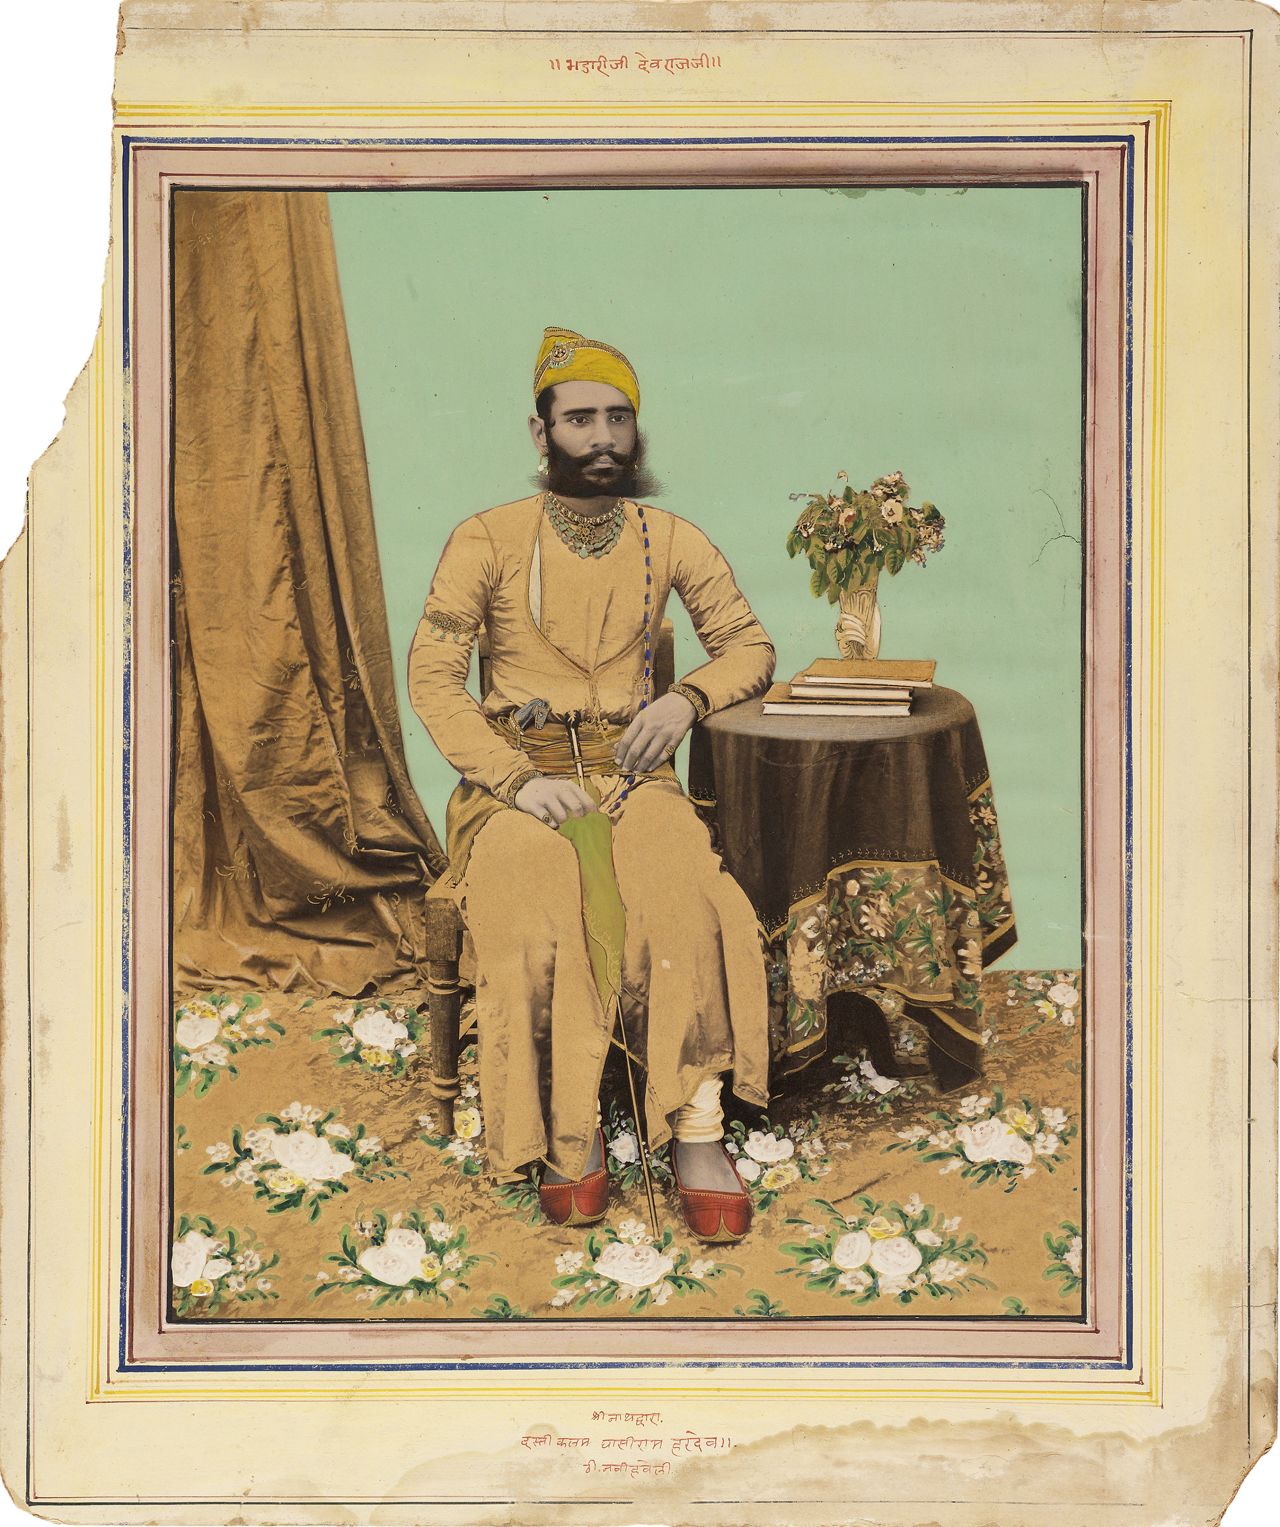 A portrait from the 1890s, demonstrating the trend in India to heavily paint over photographs.